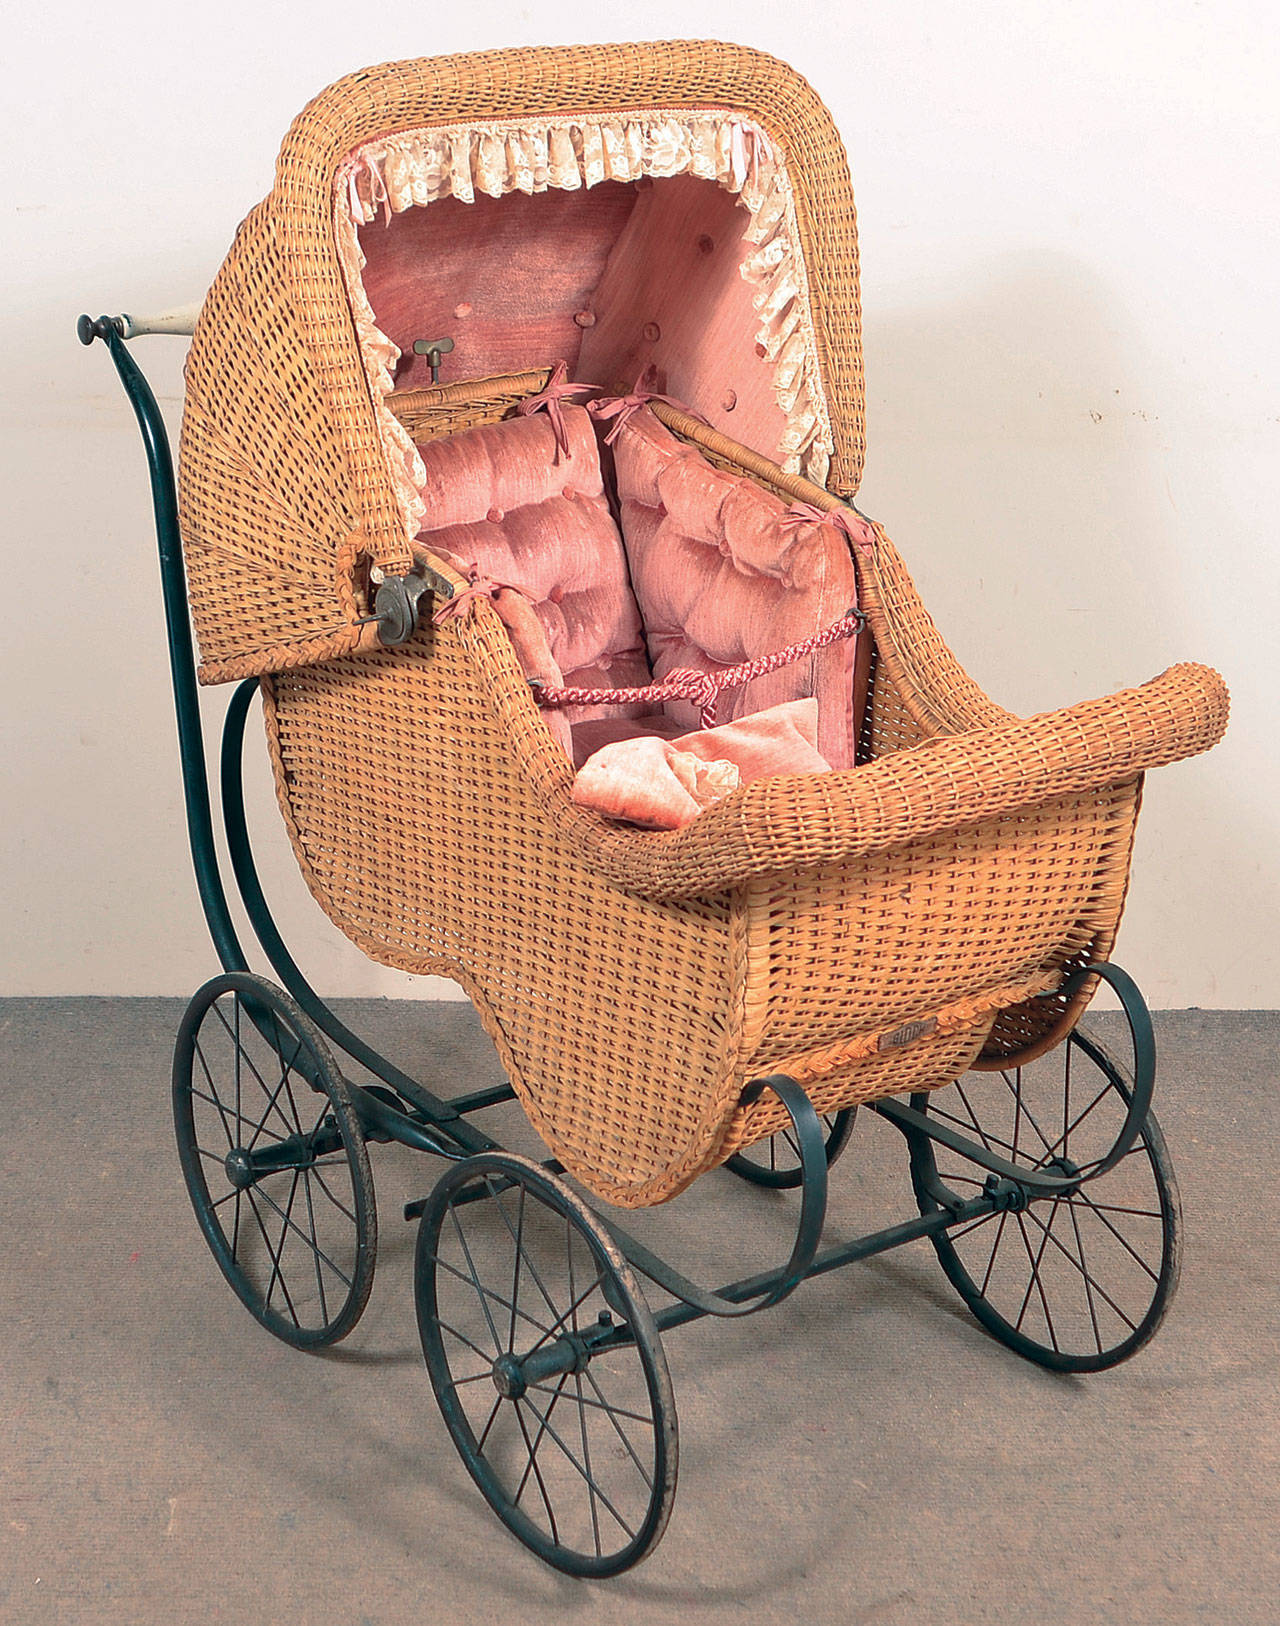 buurman Ondergeschikt In beweging 19th-century baby buggy a nice gift for this year's first born |  HeraldNet.com